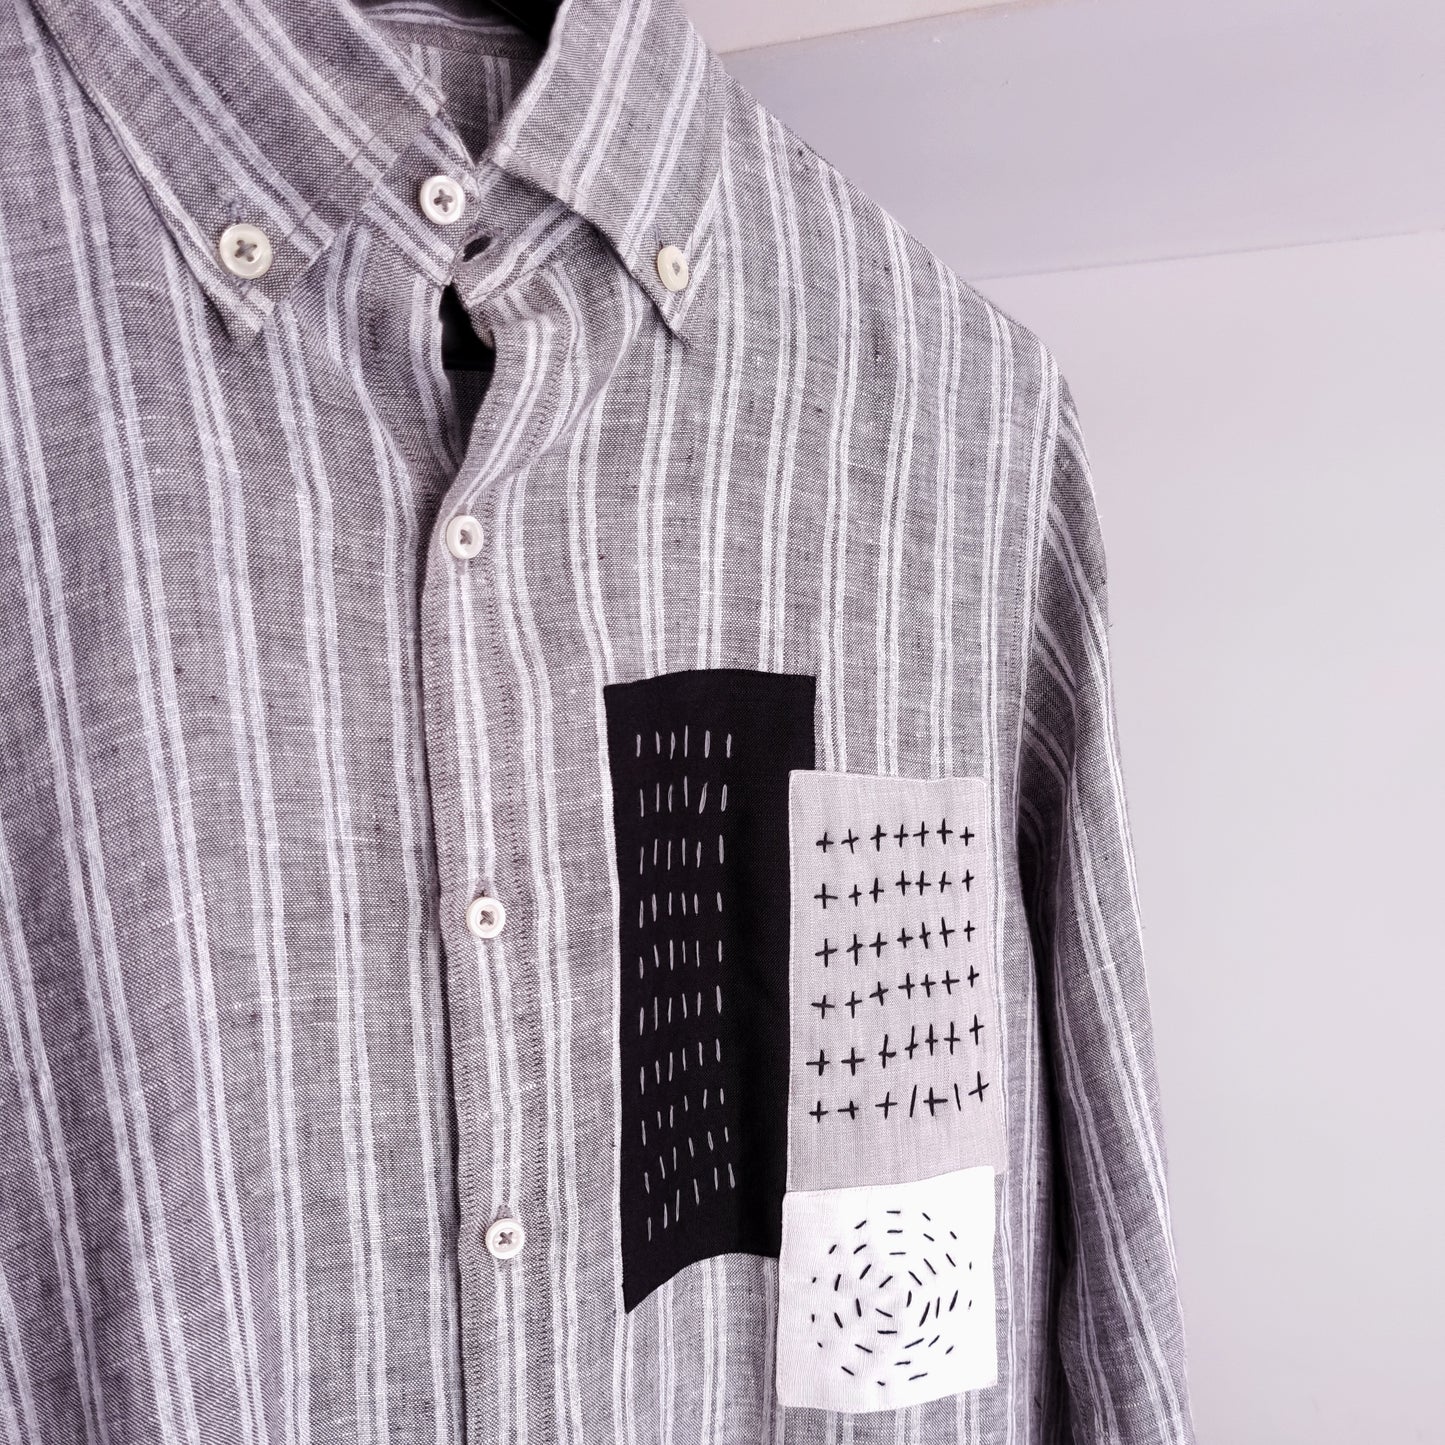 Snug's Patched Linen Shirt - Hand Crafted Elegance